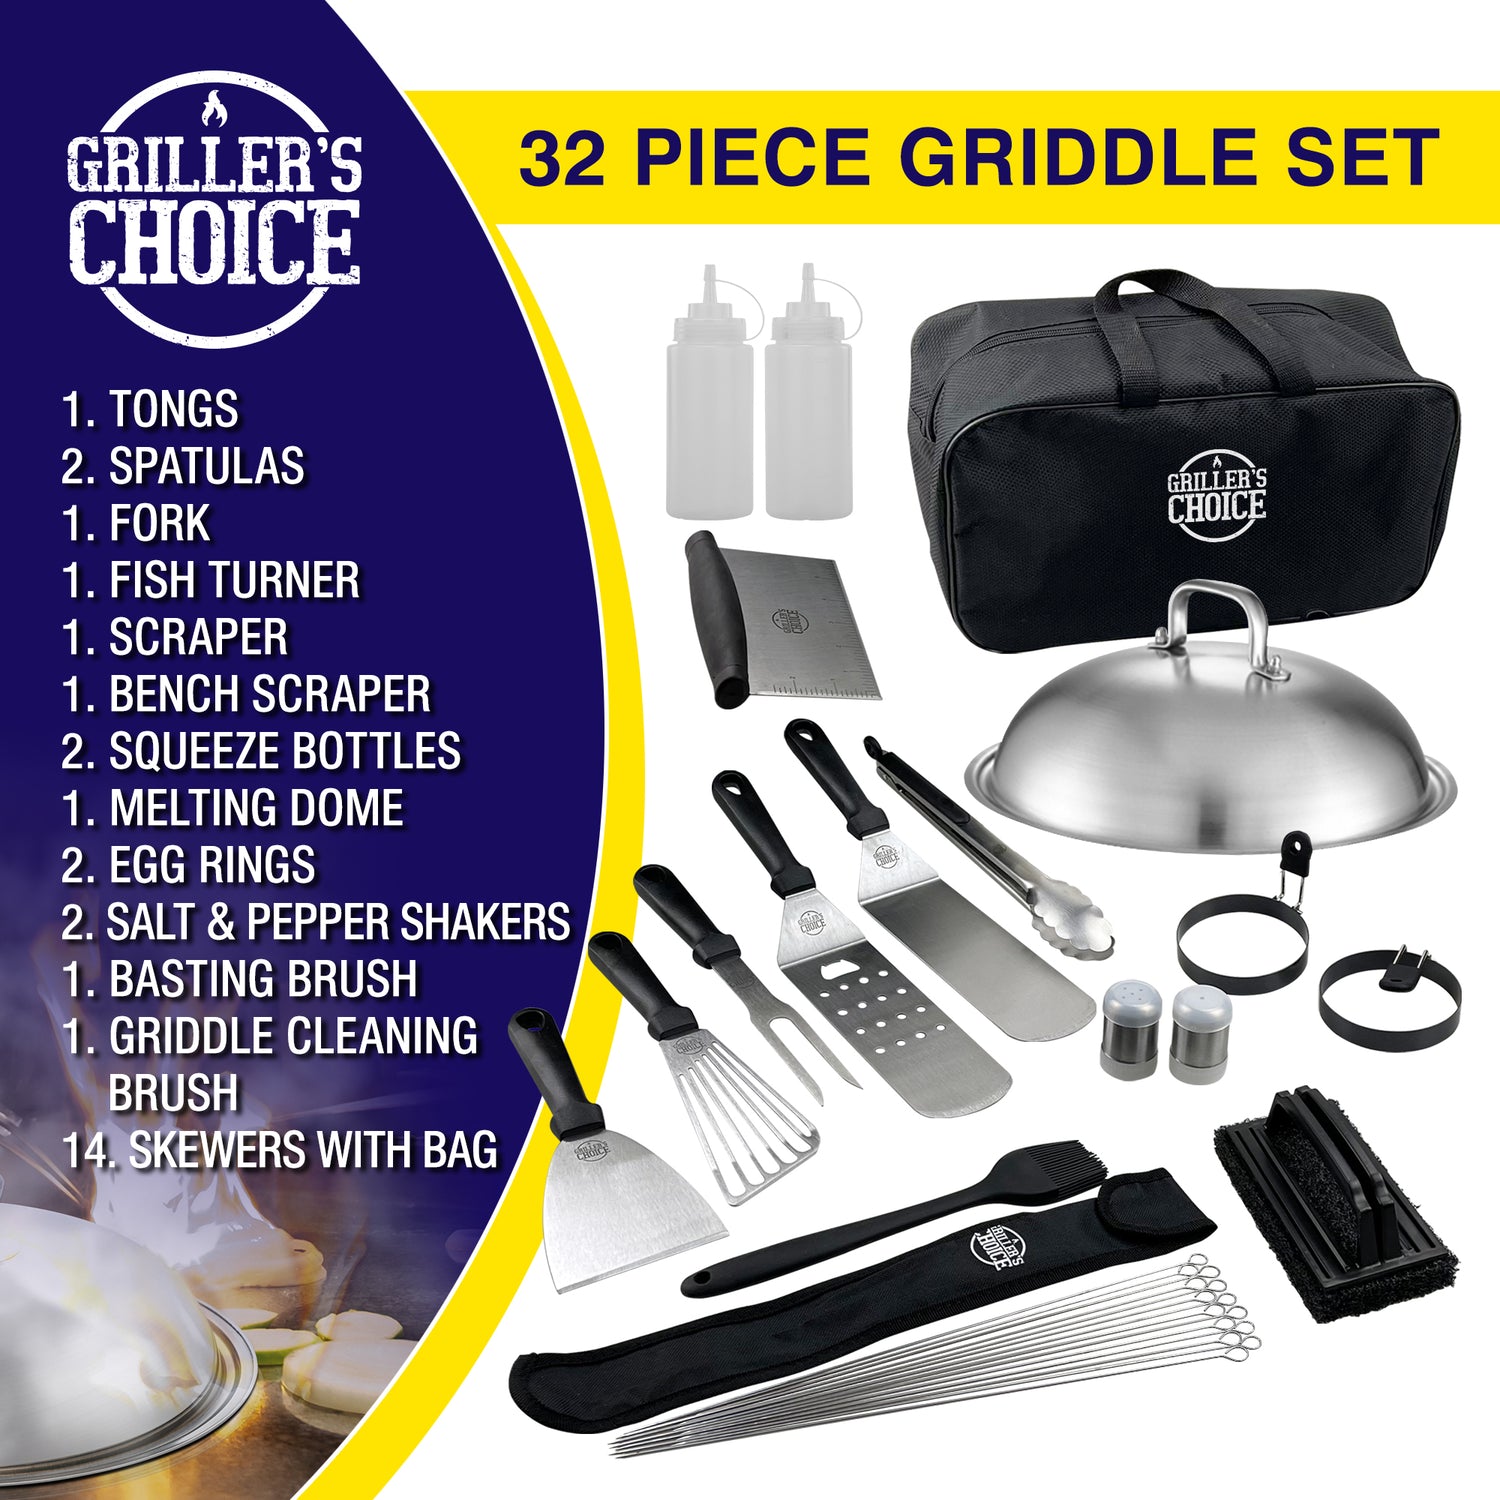 32 piece griddle set griddle grill blackstone tools metal spatula melting dome egg rings bench scraper bottles salt and pepper tongs baster cleaning brush